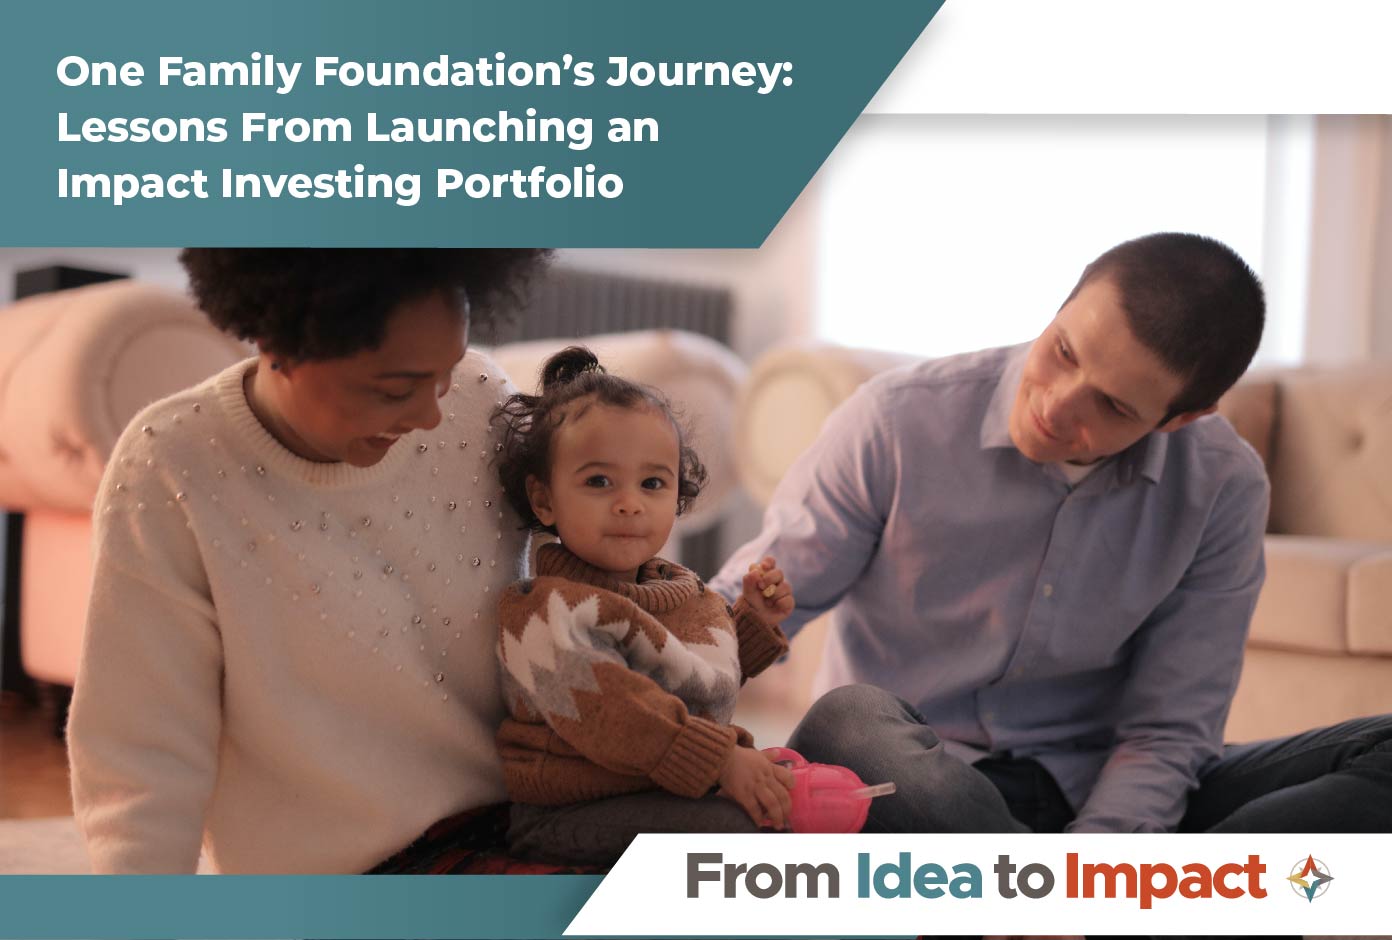 One Family Foundation’s Journey: Lessons From Launching an Impact Investing Portfolio